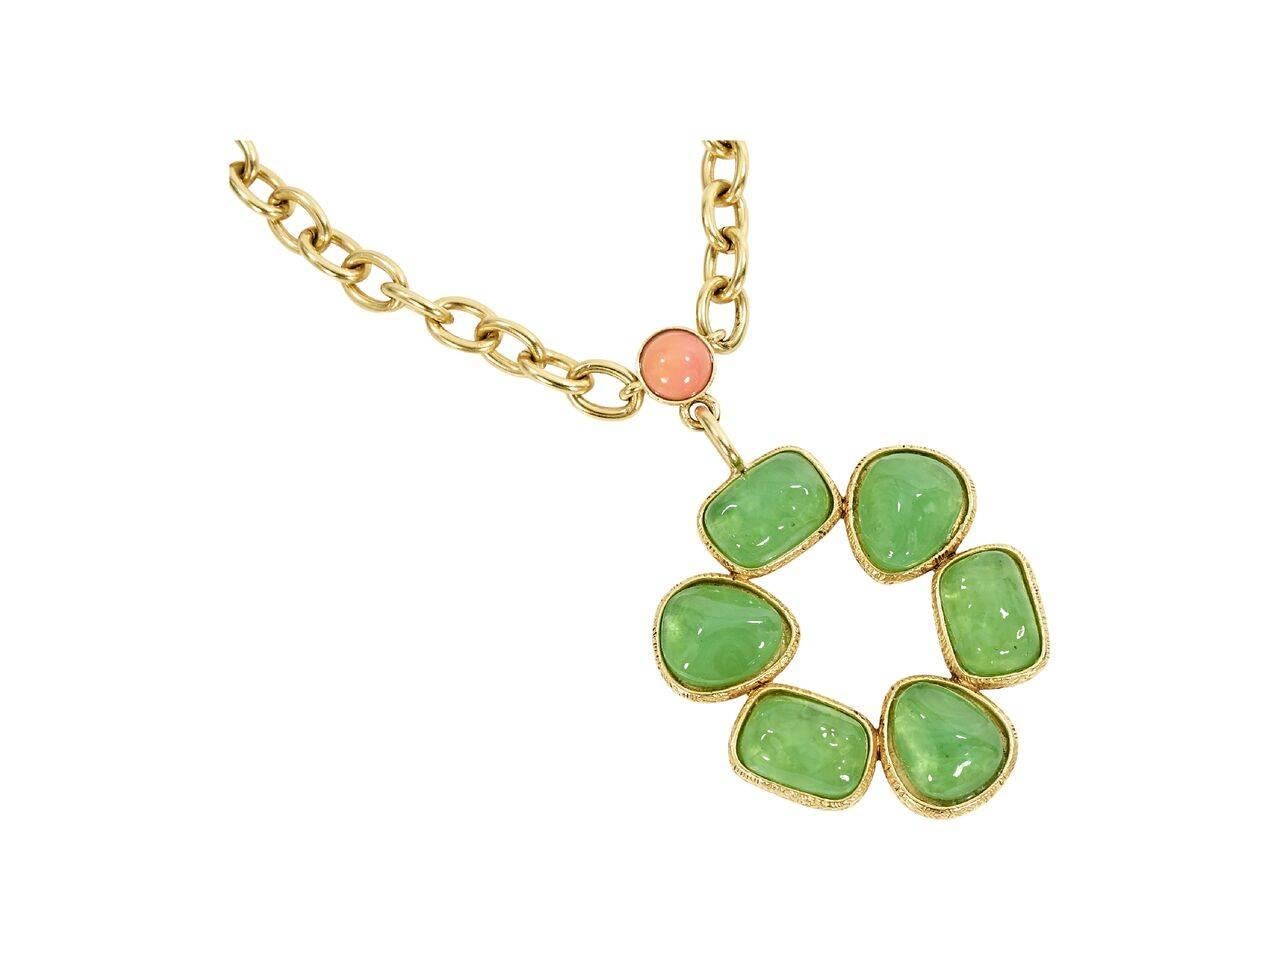 Product details:  Vintage pendant necklace by Gerard Yosca.  Single chain strand.  Circular pendant set with green stones.  Goldtone hardware.  18.75